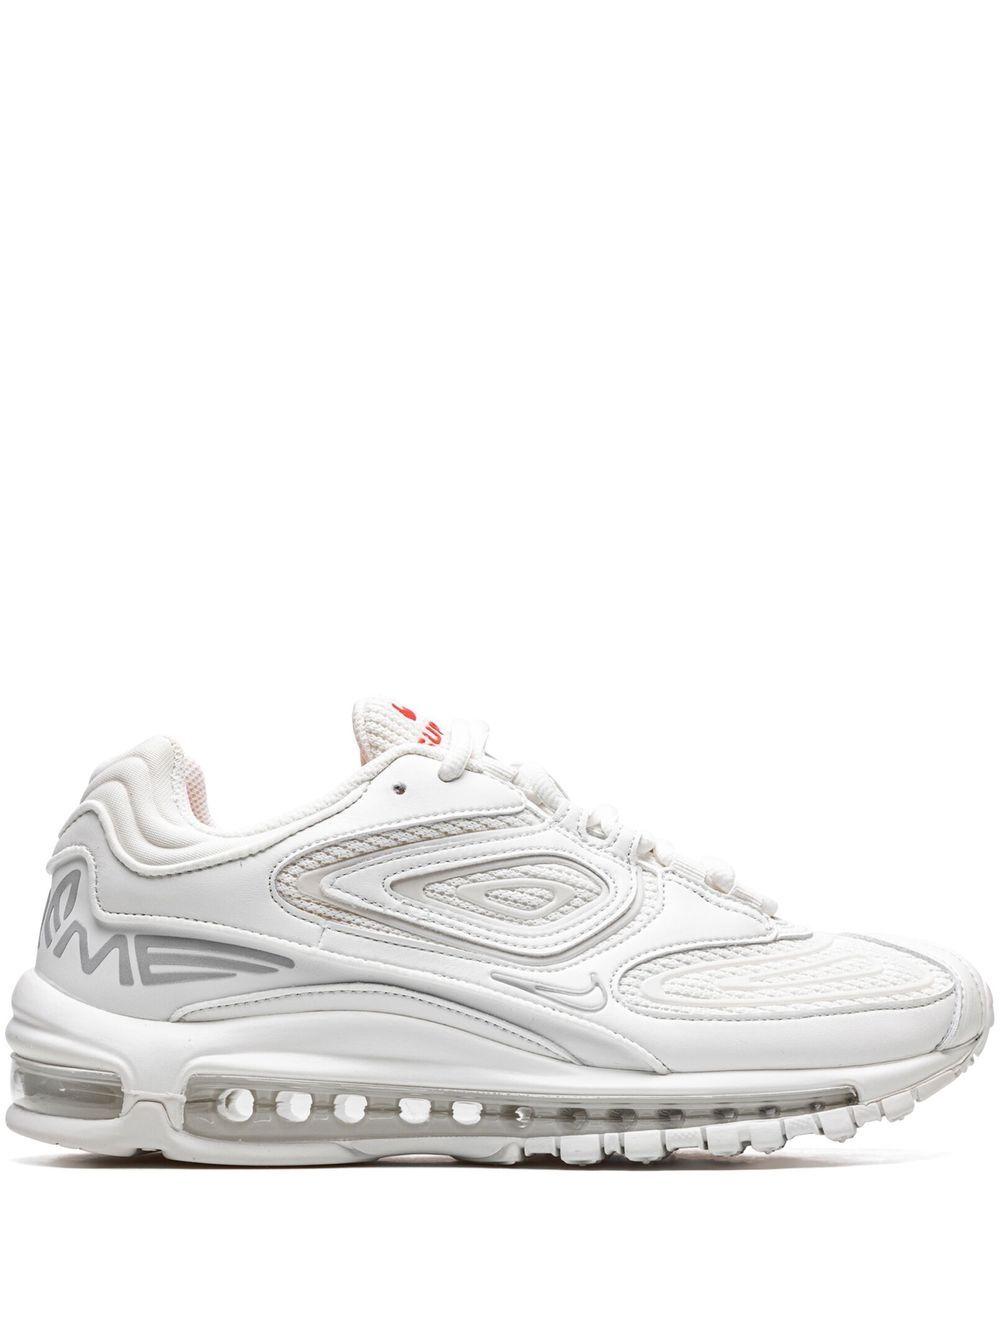 Nike X Supreme Air Max 98 Tl Sneakers in White for Men | Lyst